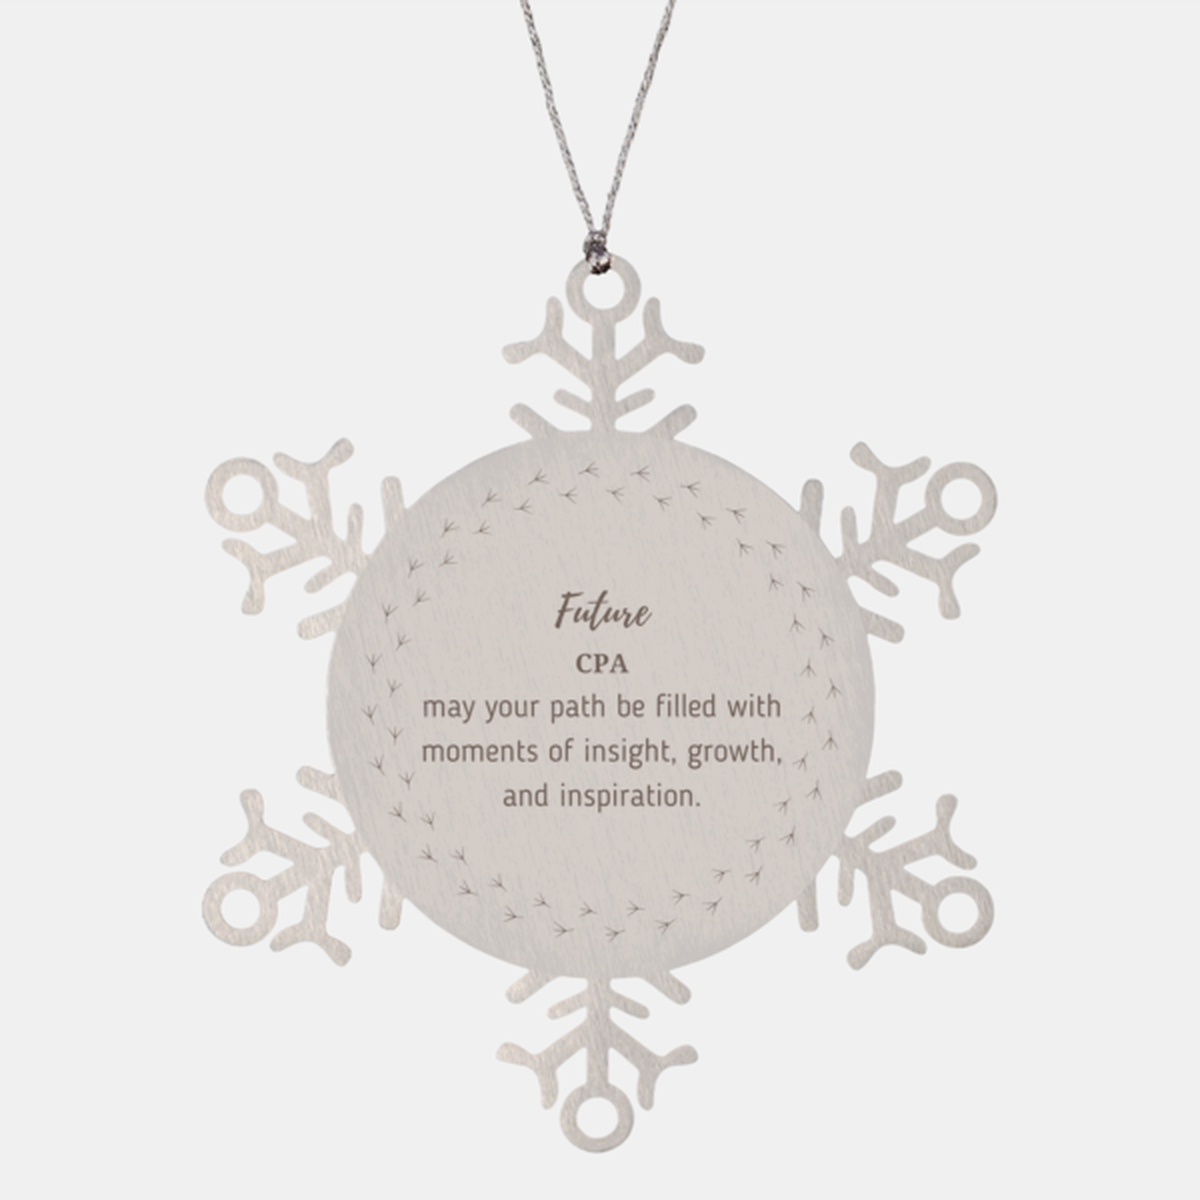 Future CPA Gifts, May your path be filled with moments of insight, Graduation Gifts for New CPA, Christmas Unique Snowflake Ornament For Men, Women, Friends